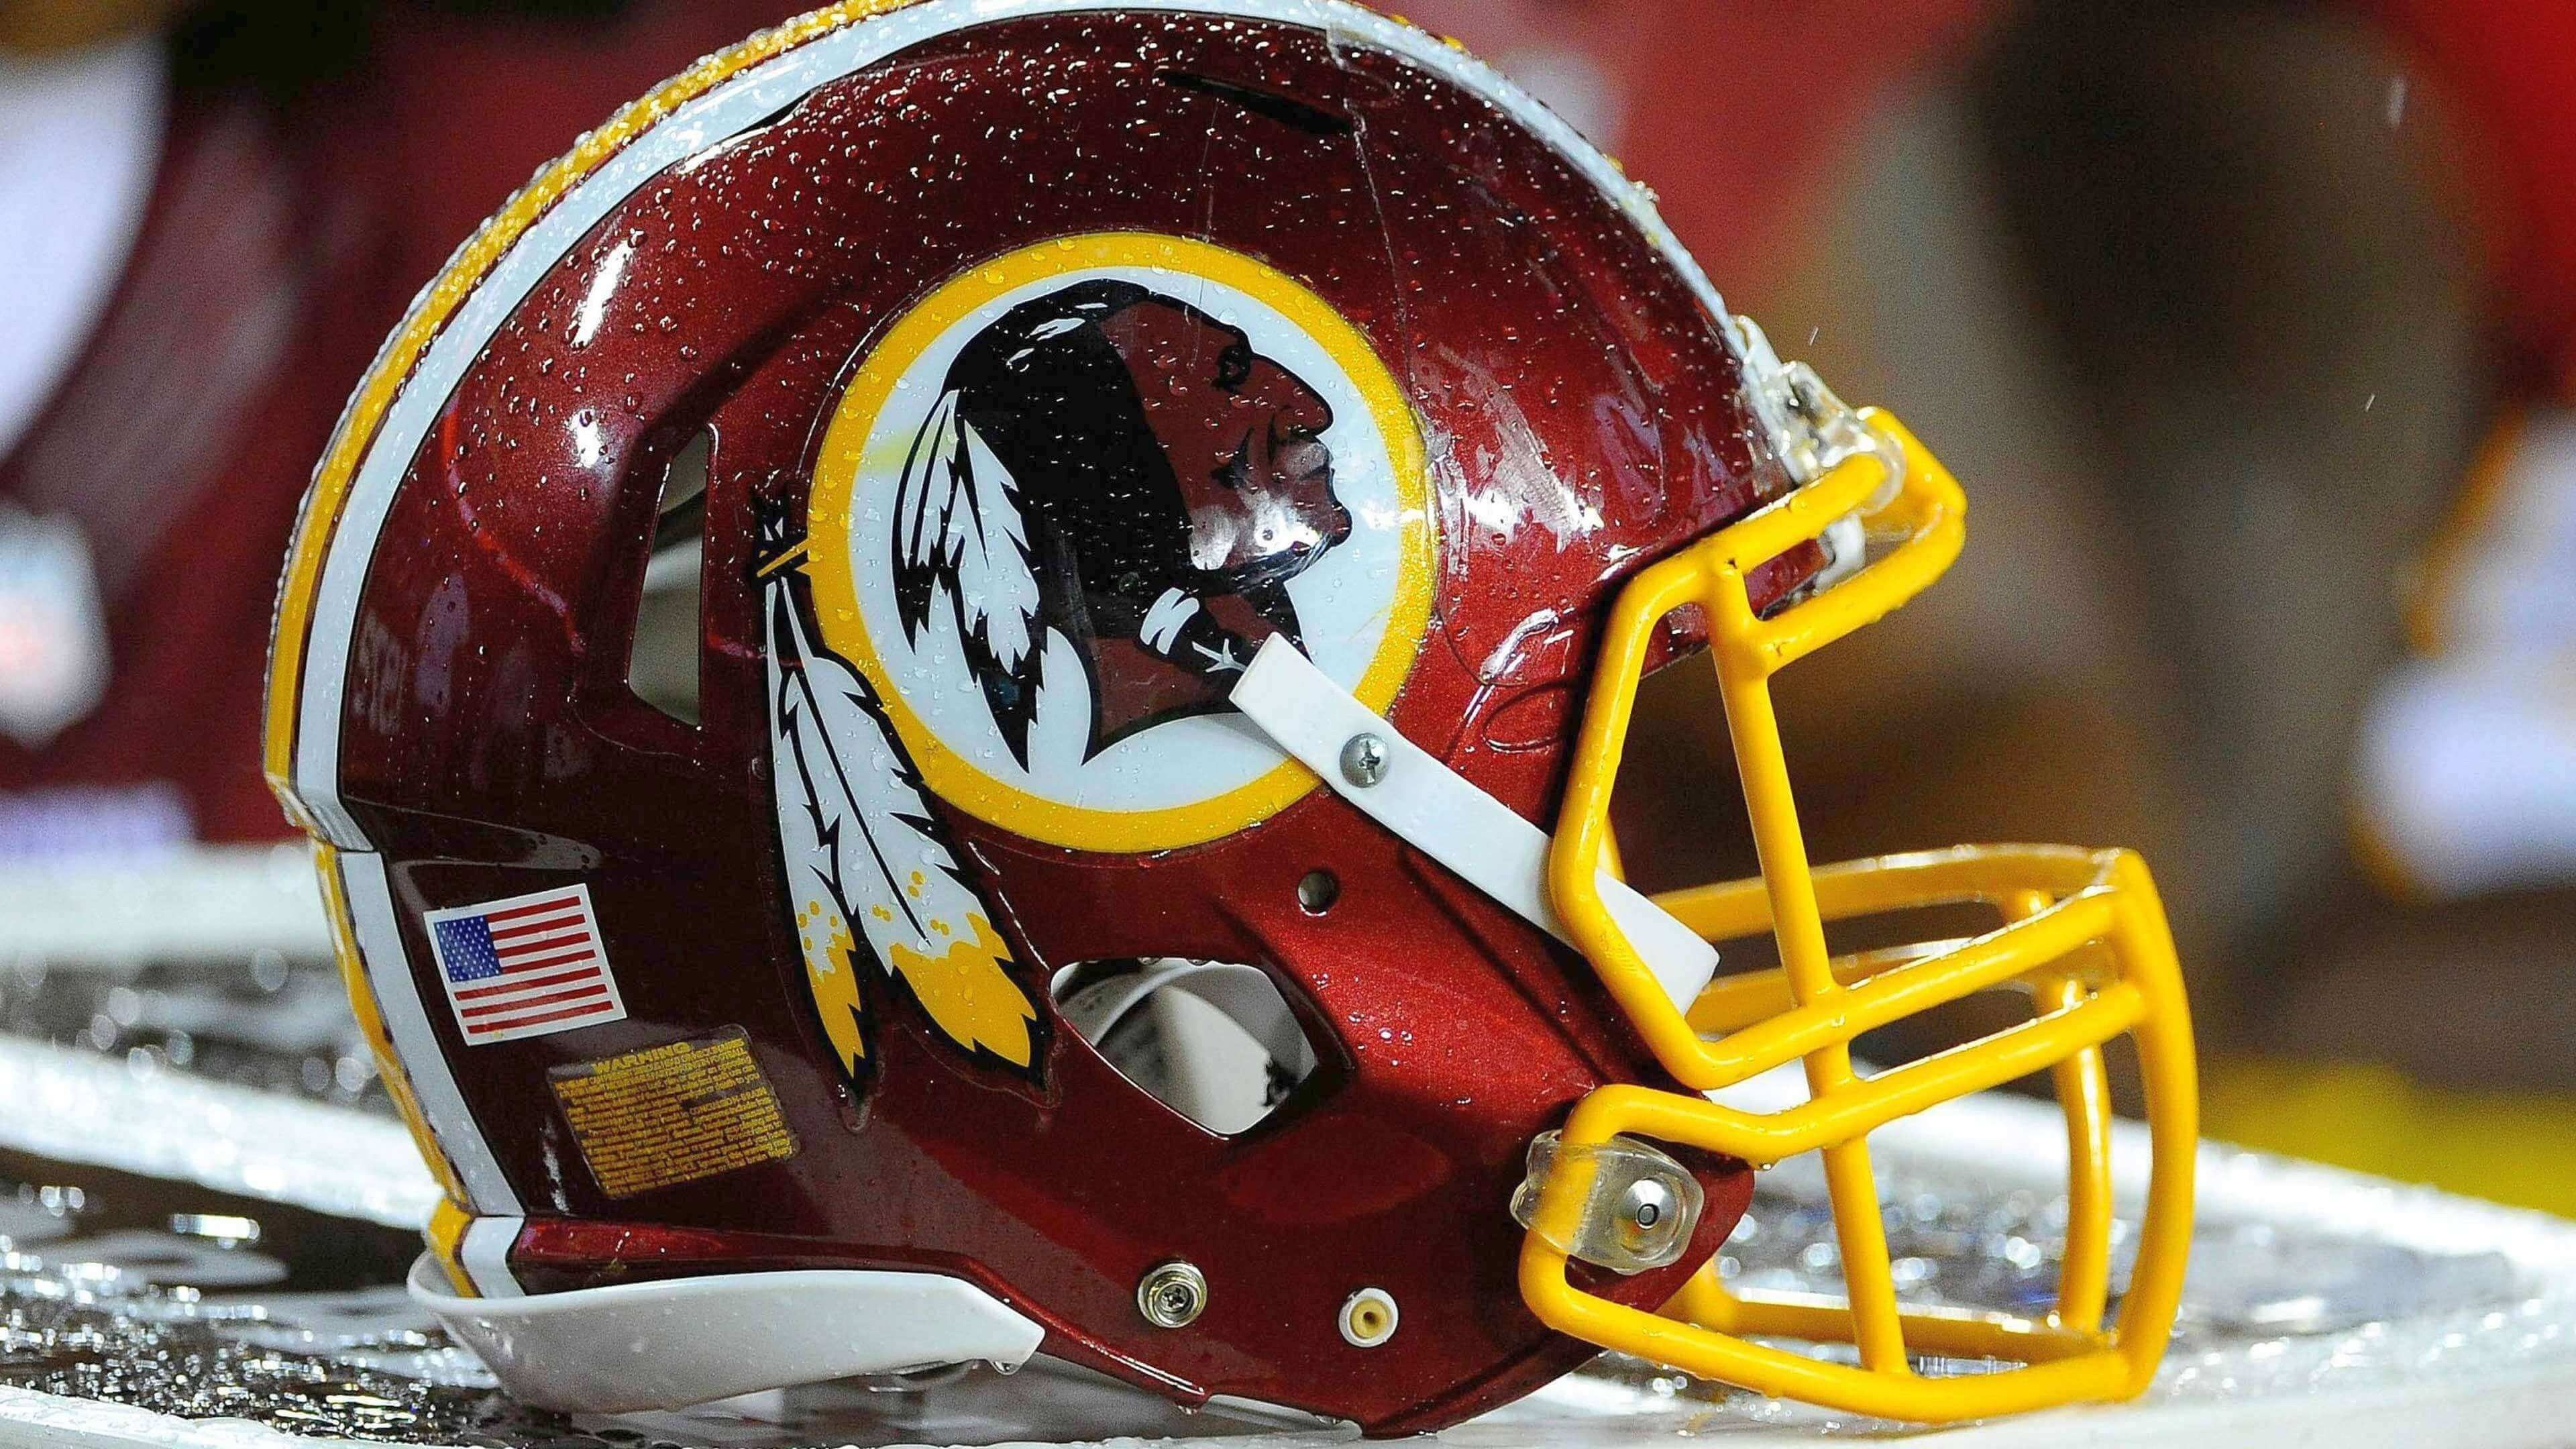 American Football: The Washington Commanders, formerly known as the Washington Redskins. 3840x2160 4K Background.